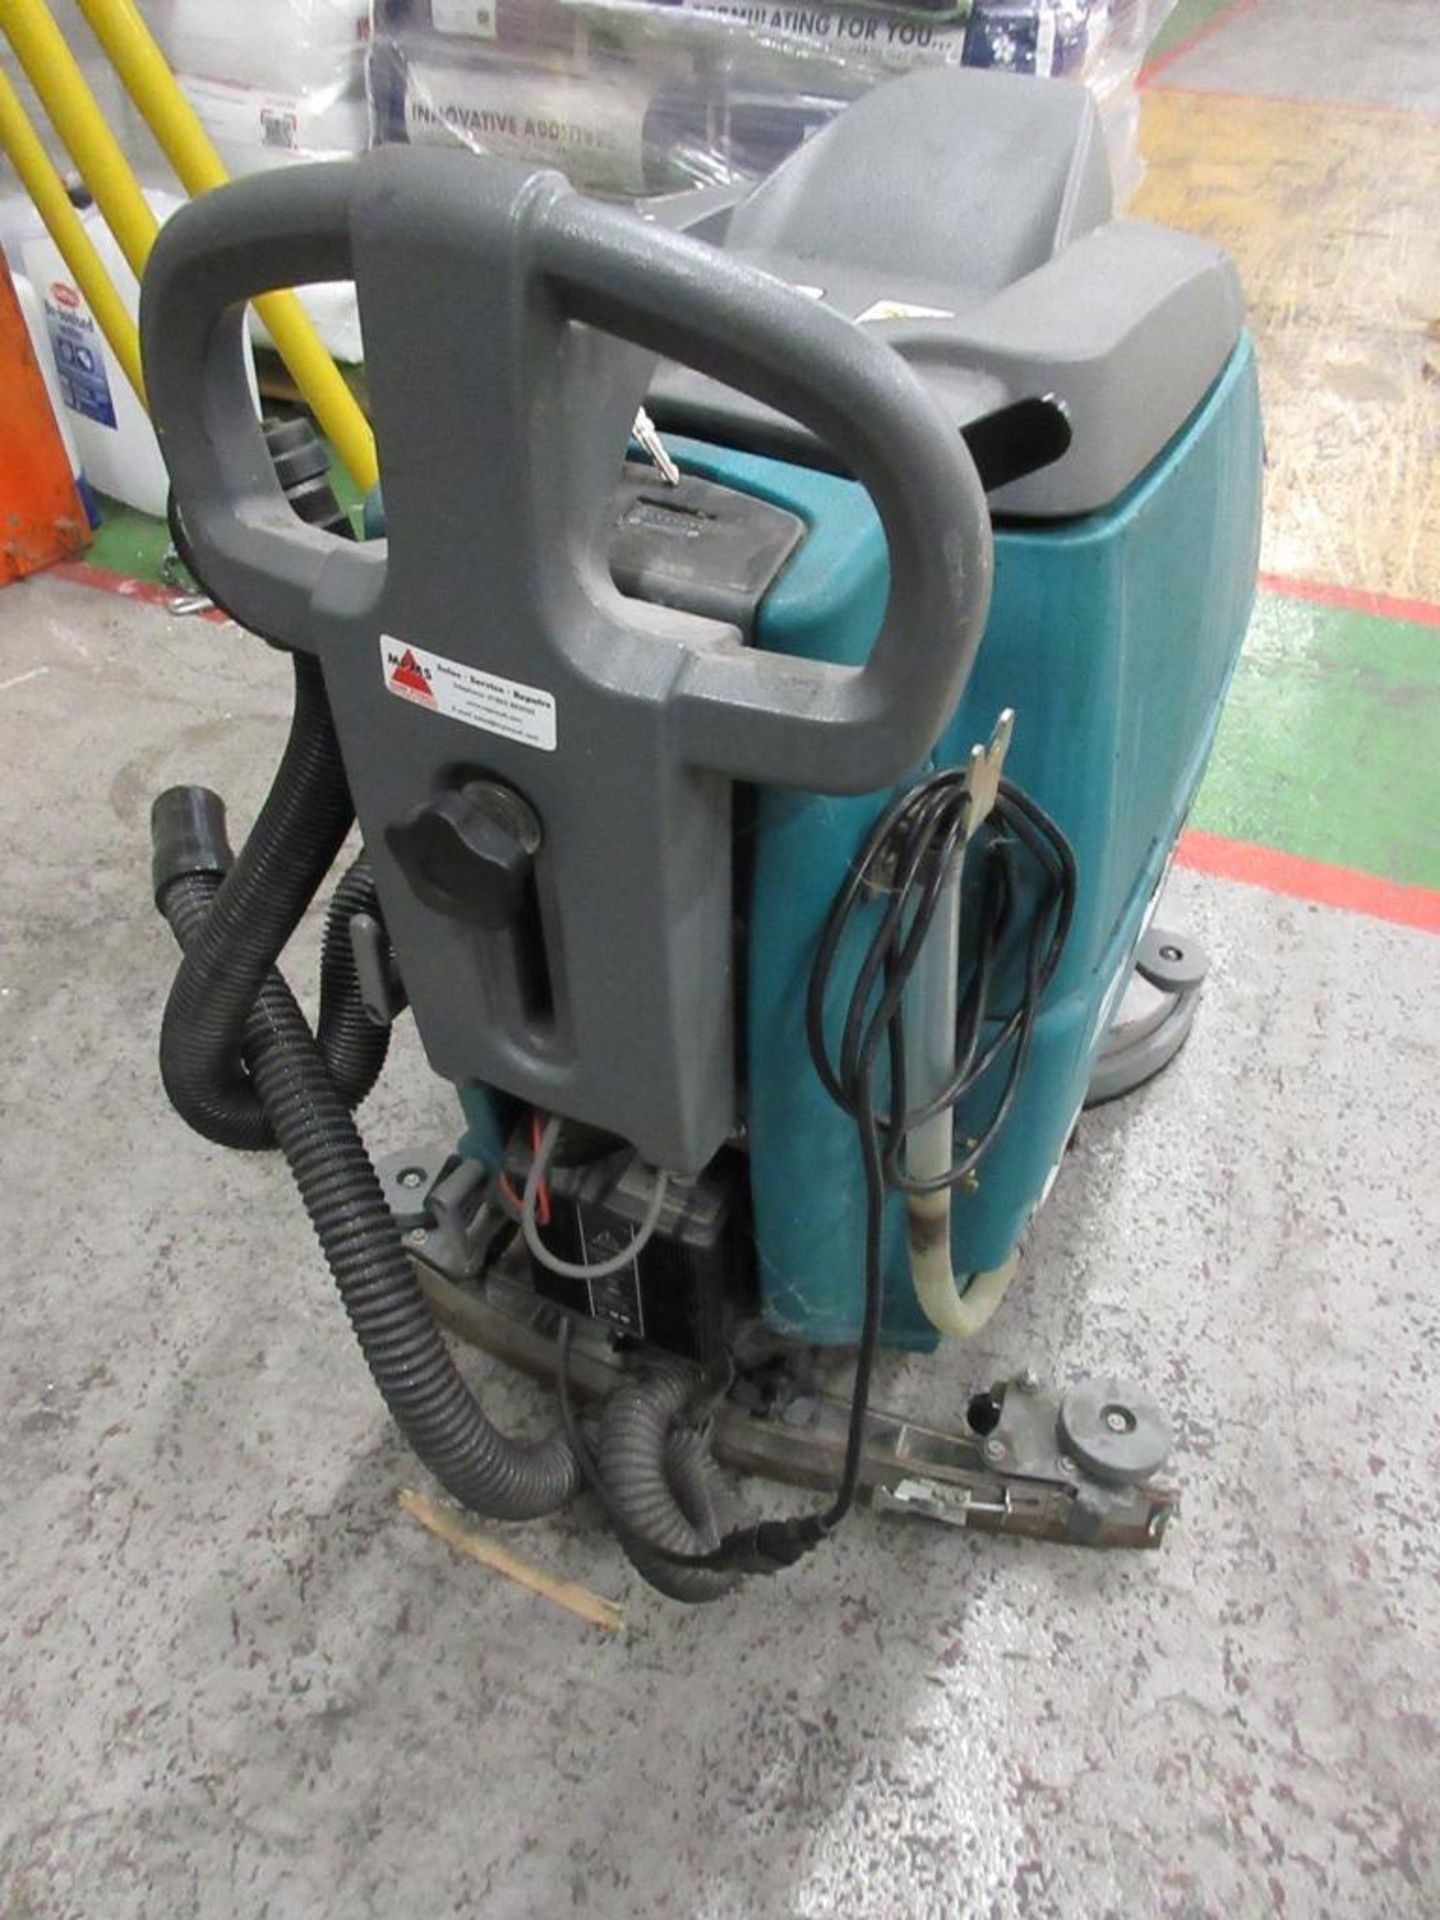 Tennant T2 pedestrian battery operated floor scrubber dryer, 240v - Image 2 of 3